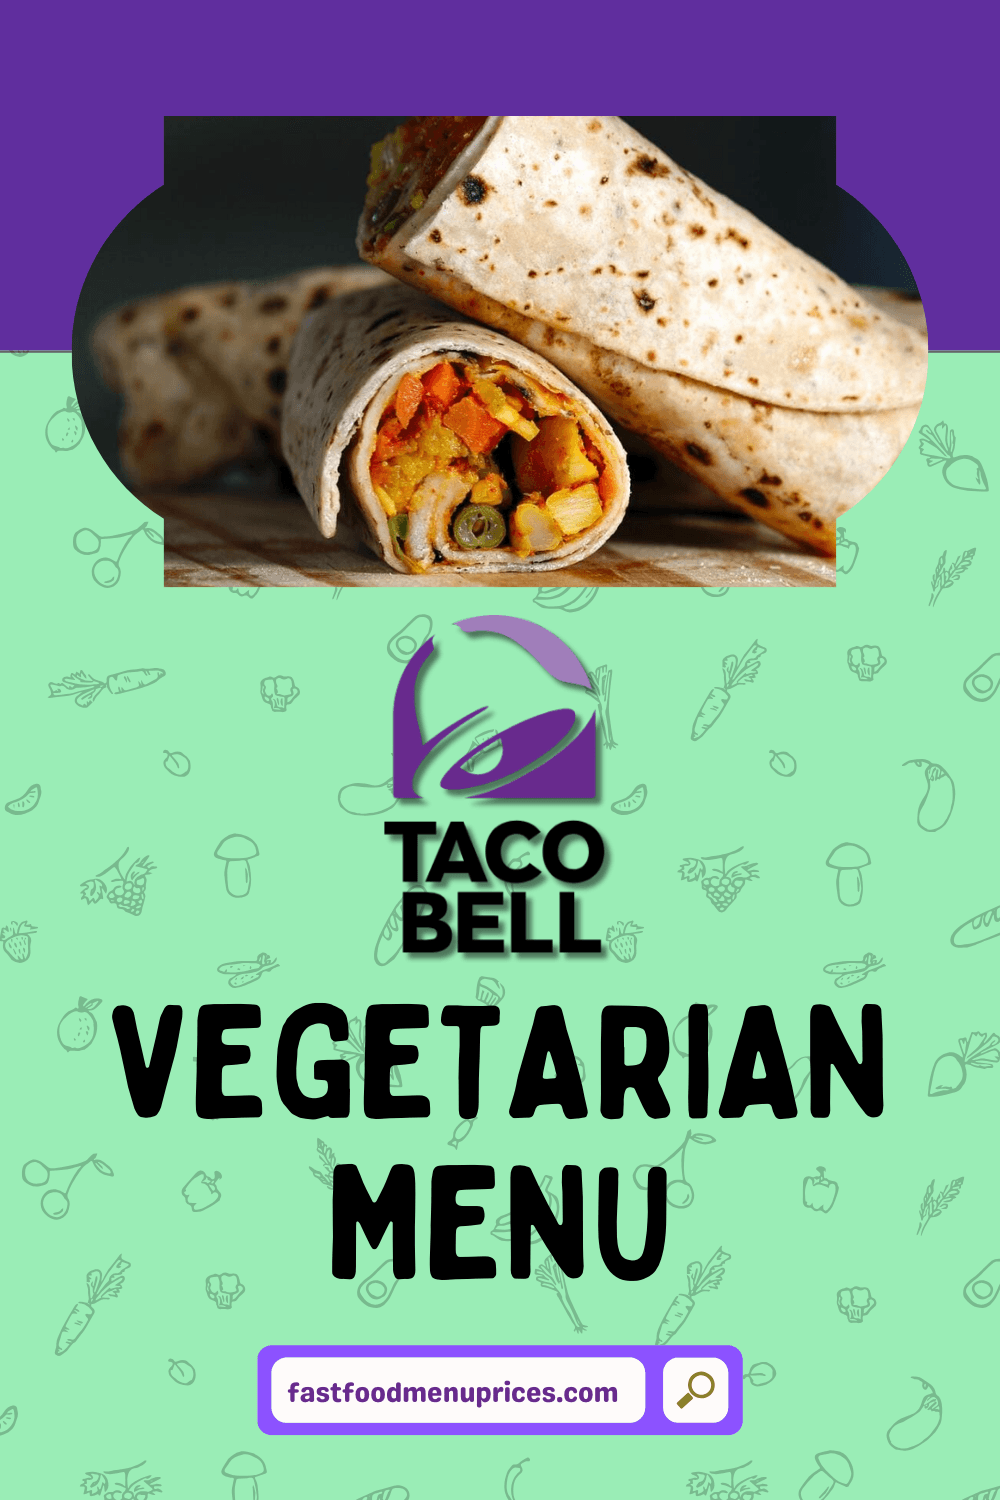 Check out Taco Bell's vegetarian menu offering a wide variety of delicious and satisfying plant-based options.